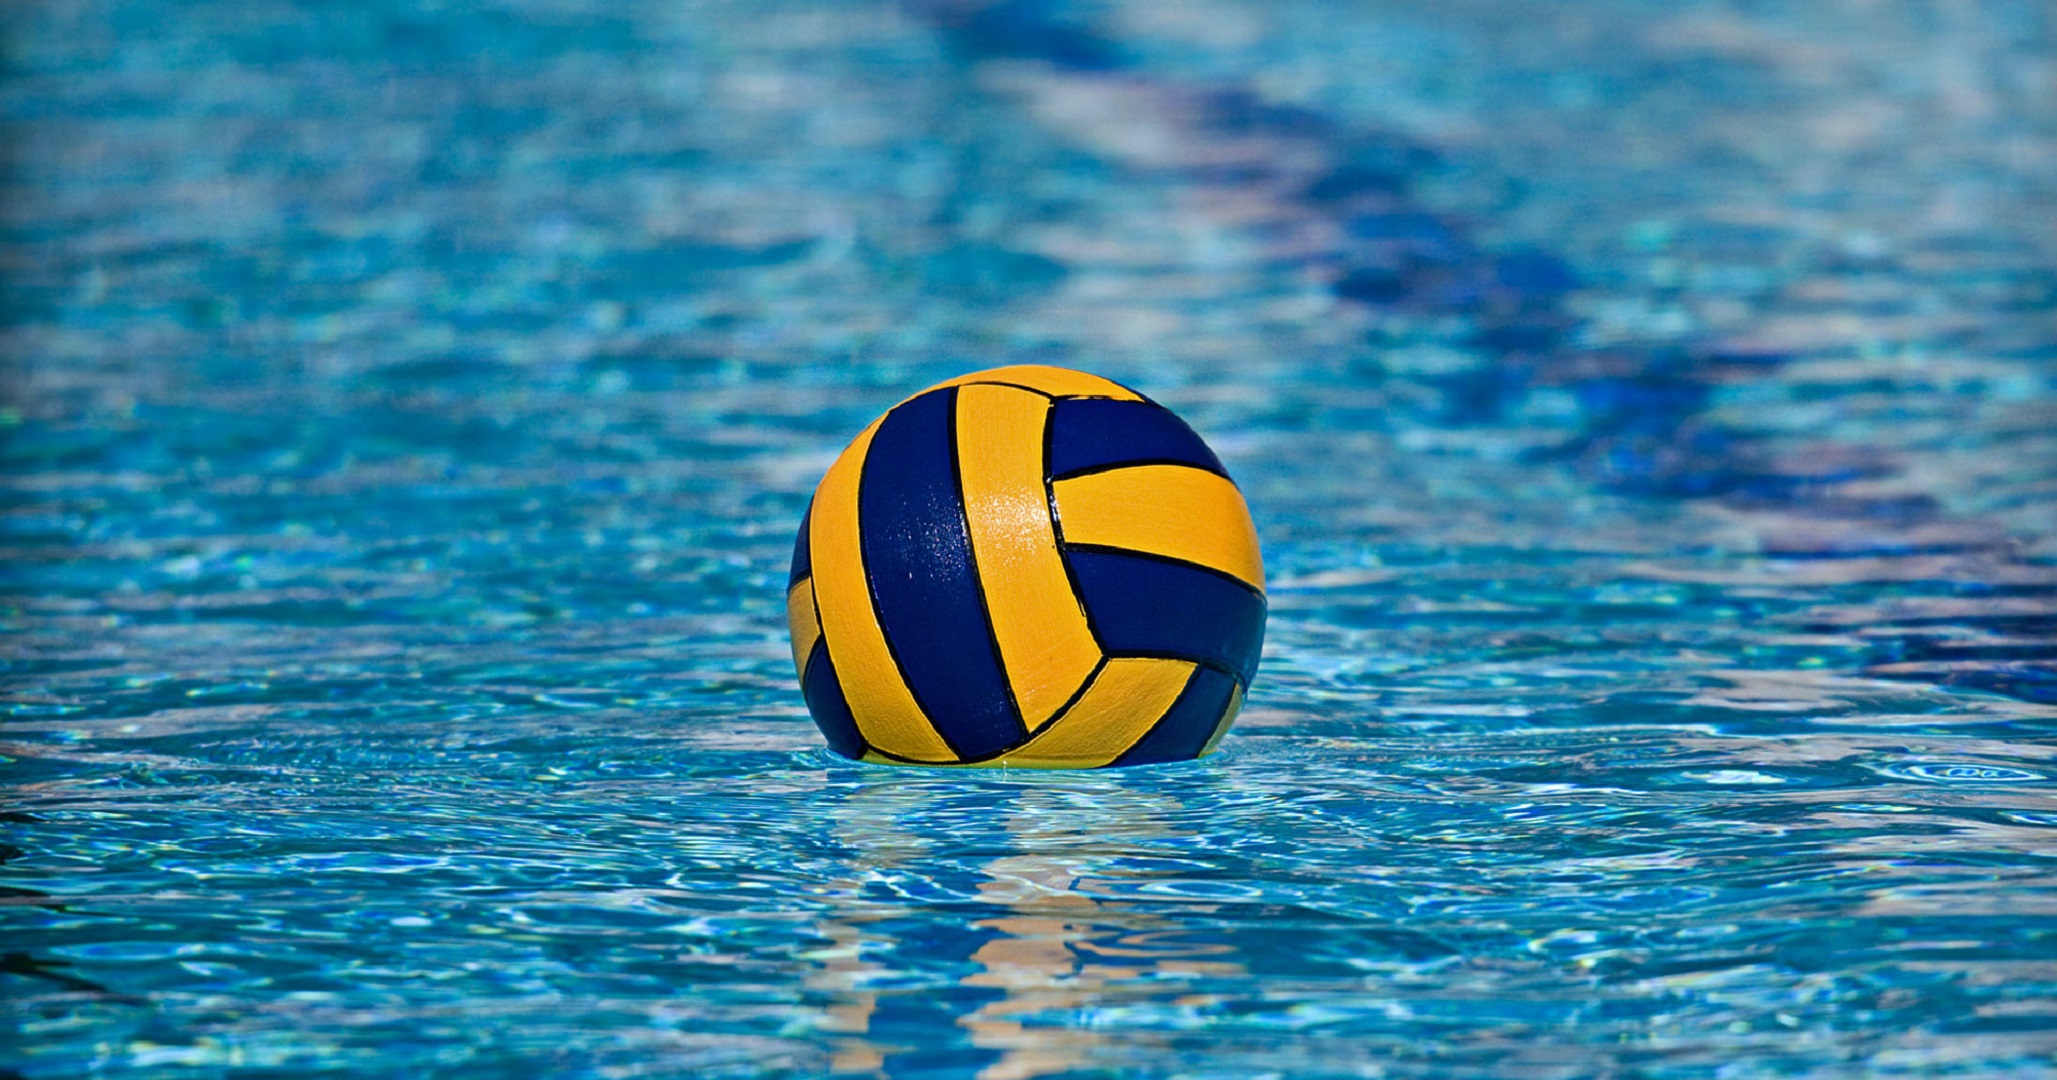 https://wzpc.nl/wp-content/uploads/2019/03/Water-Polo-Pictures.jpg